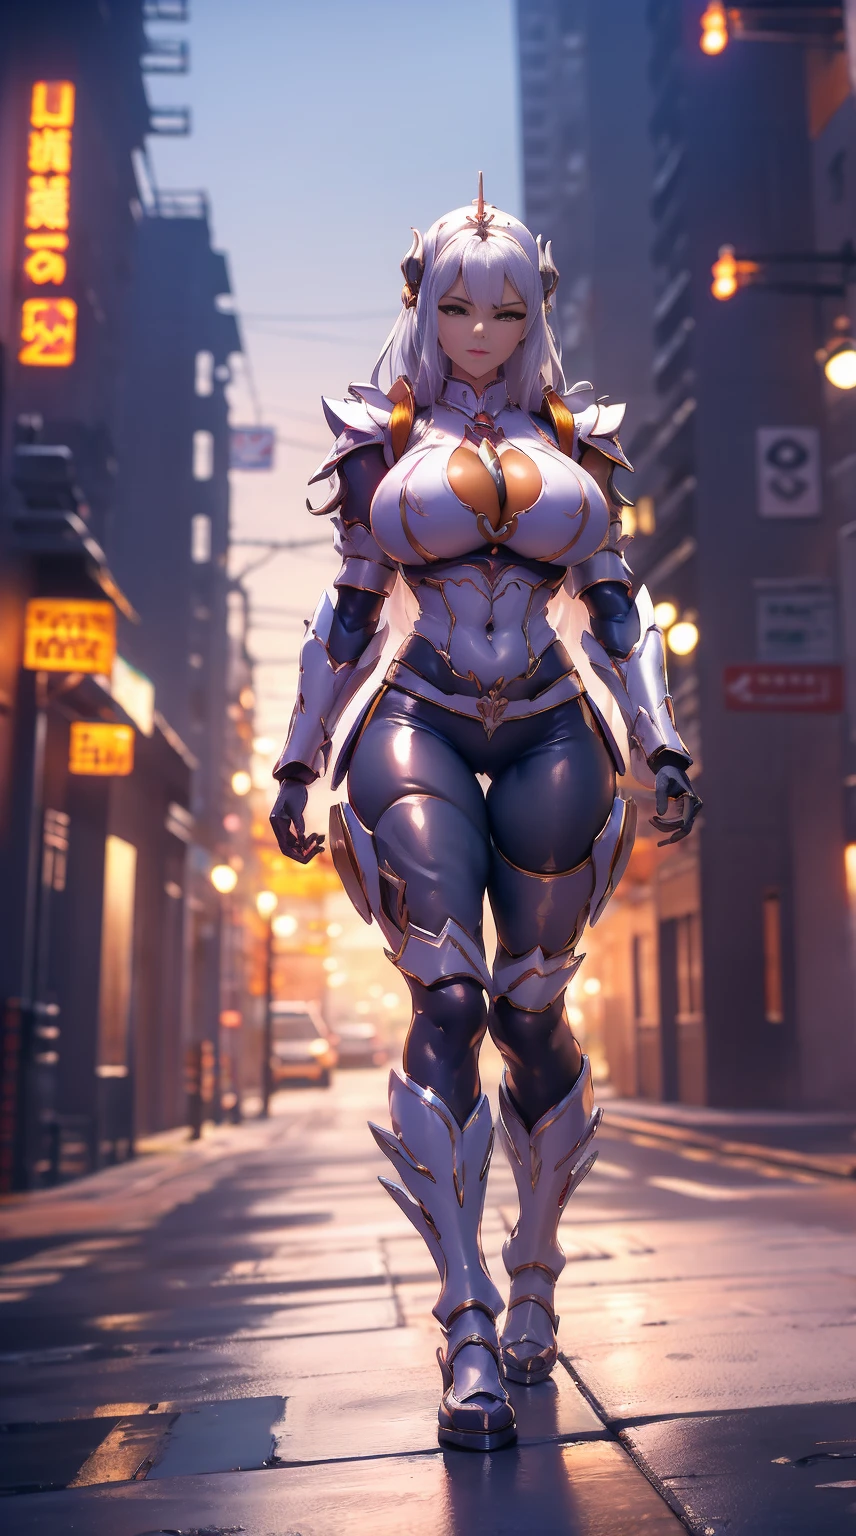 (dragon queen), Horse tail, (Huge fake tits:1.3), (Beautiful face), (white, orange), (CYBERPUNK STREET CITY BACKGROUND), (CYBER MECHA BRA), (neckline), (skin tight yoga pants), (High heels), (perfect body:1.2), (full body view), (looking at the viewer), (walking down:1.3), muscled body, muscular abs, UHD, 8k, 1080P.